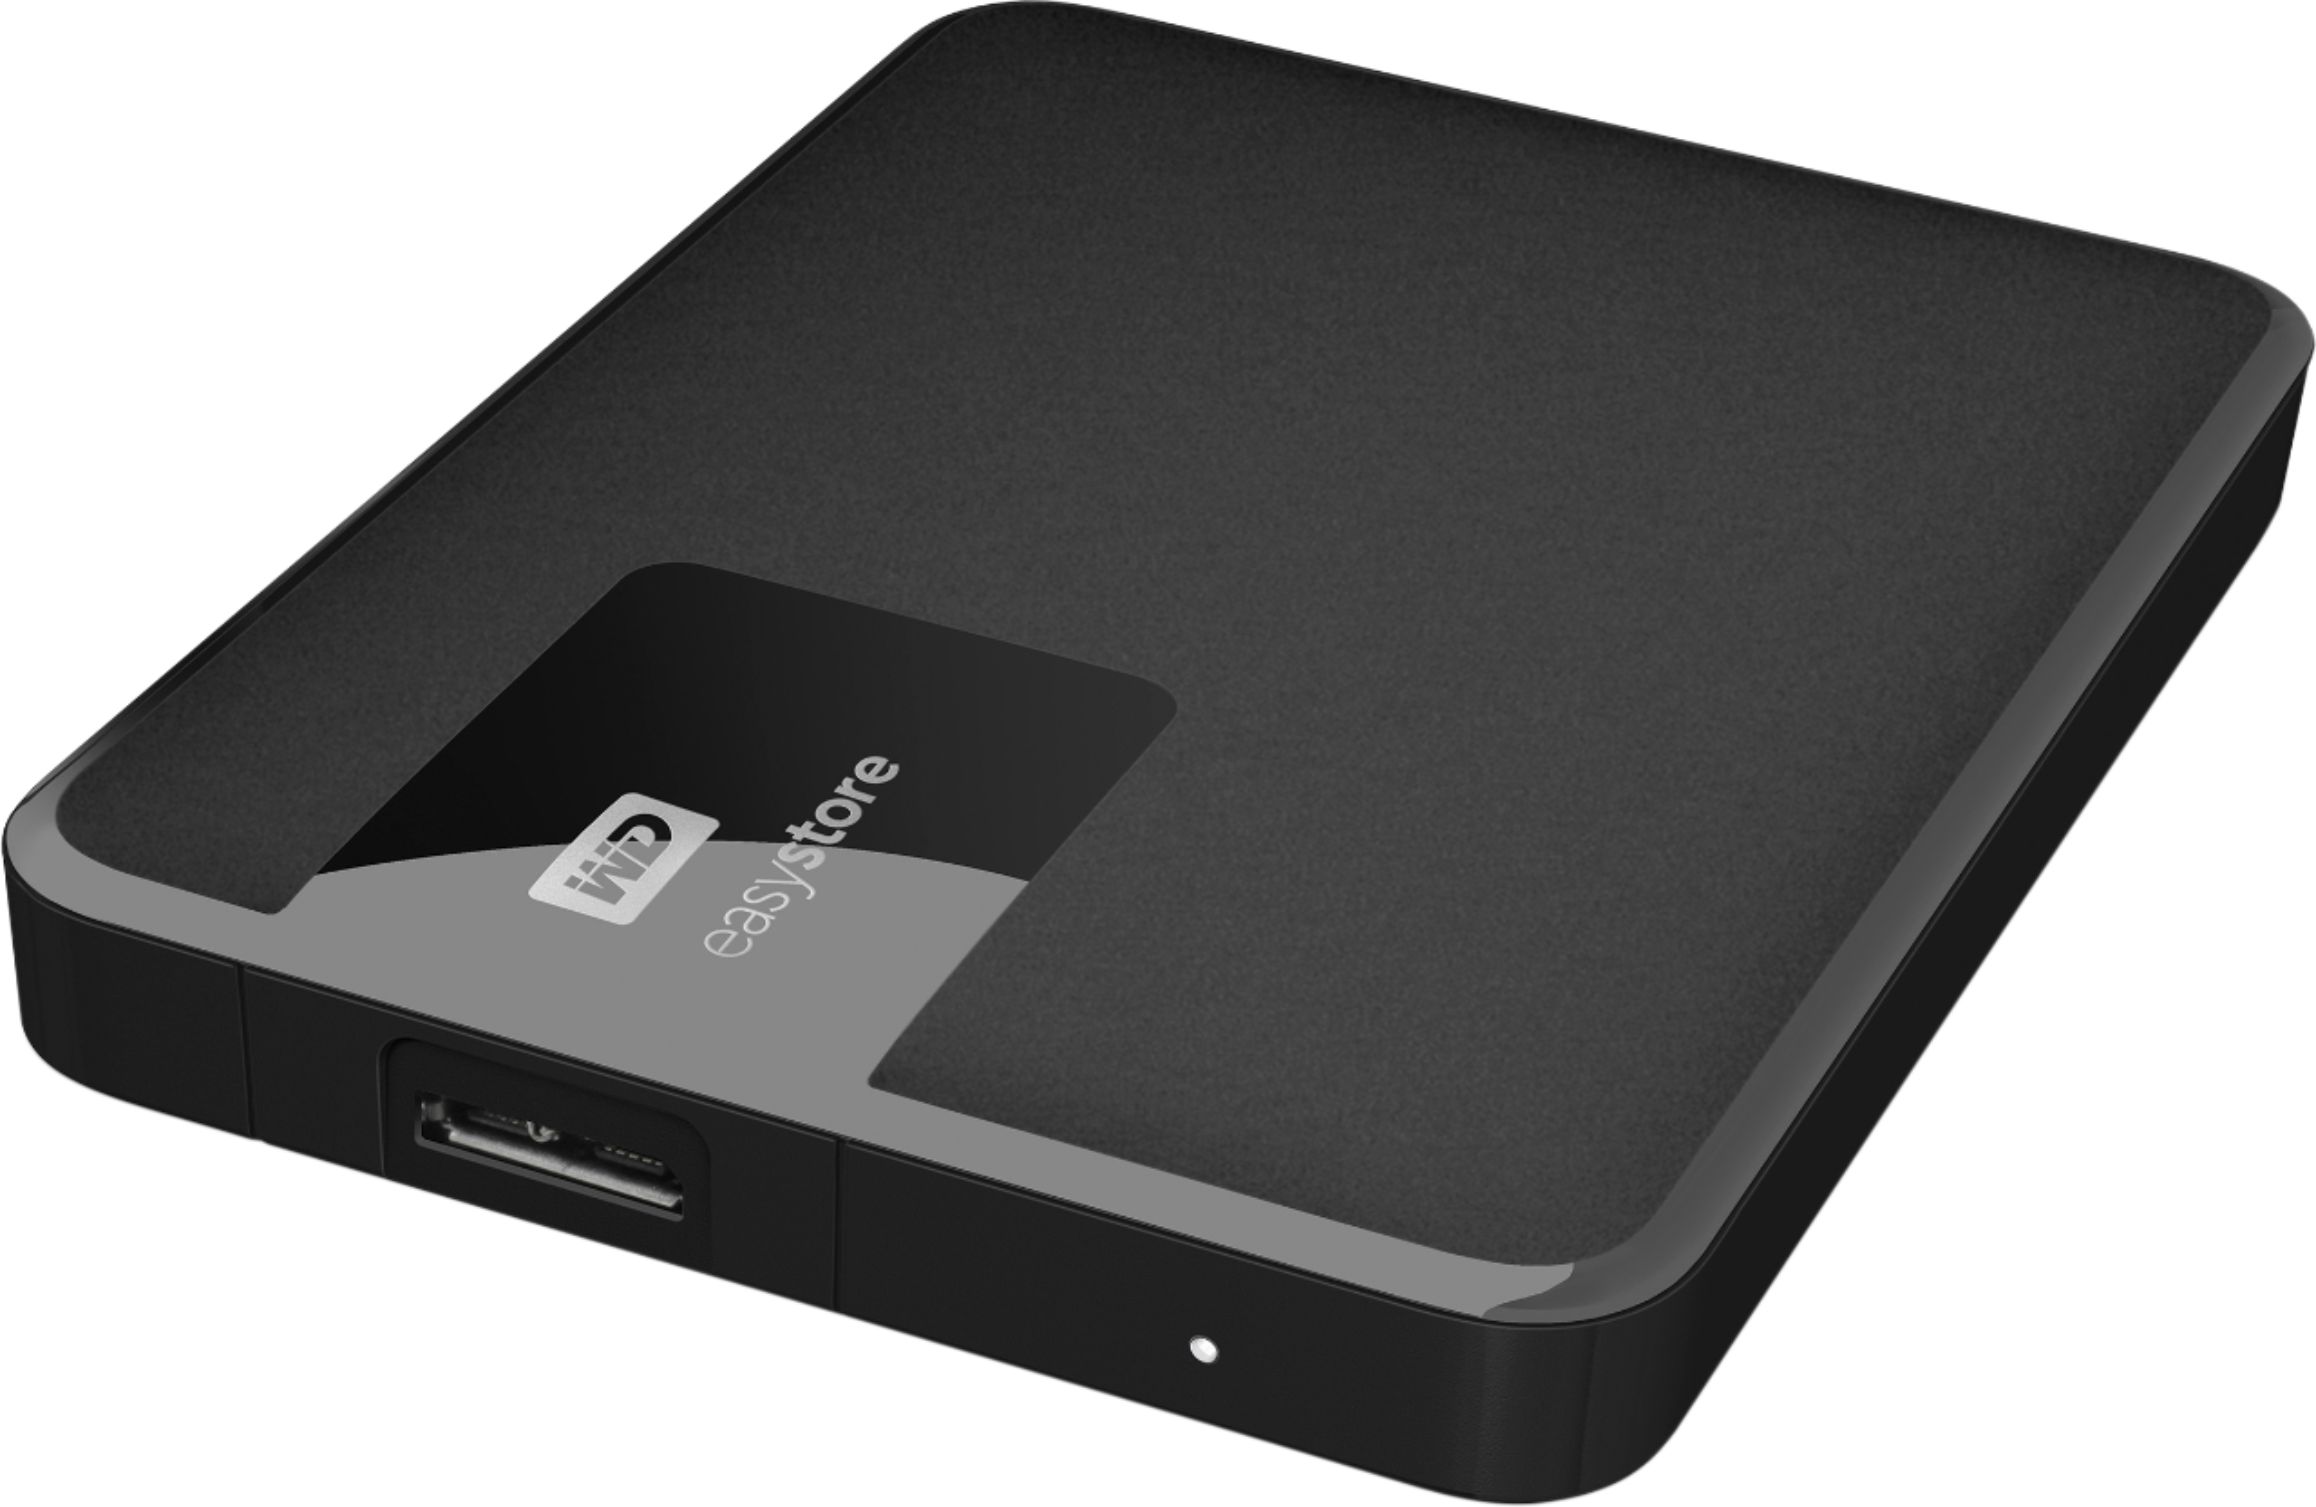 Questions and Answers: WD easystore 1TB External USB 3.0 Portable Hard